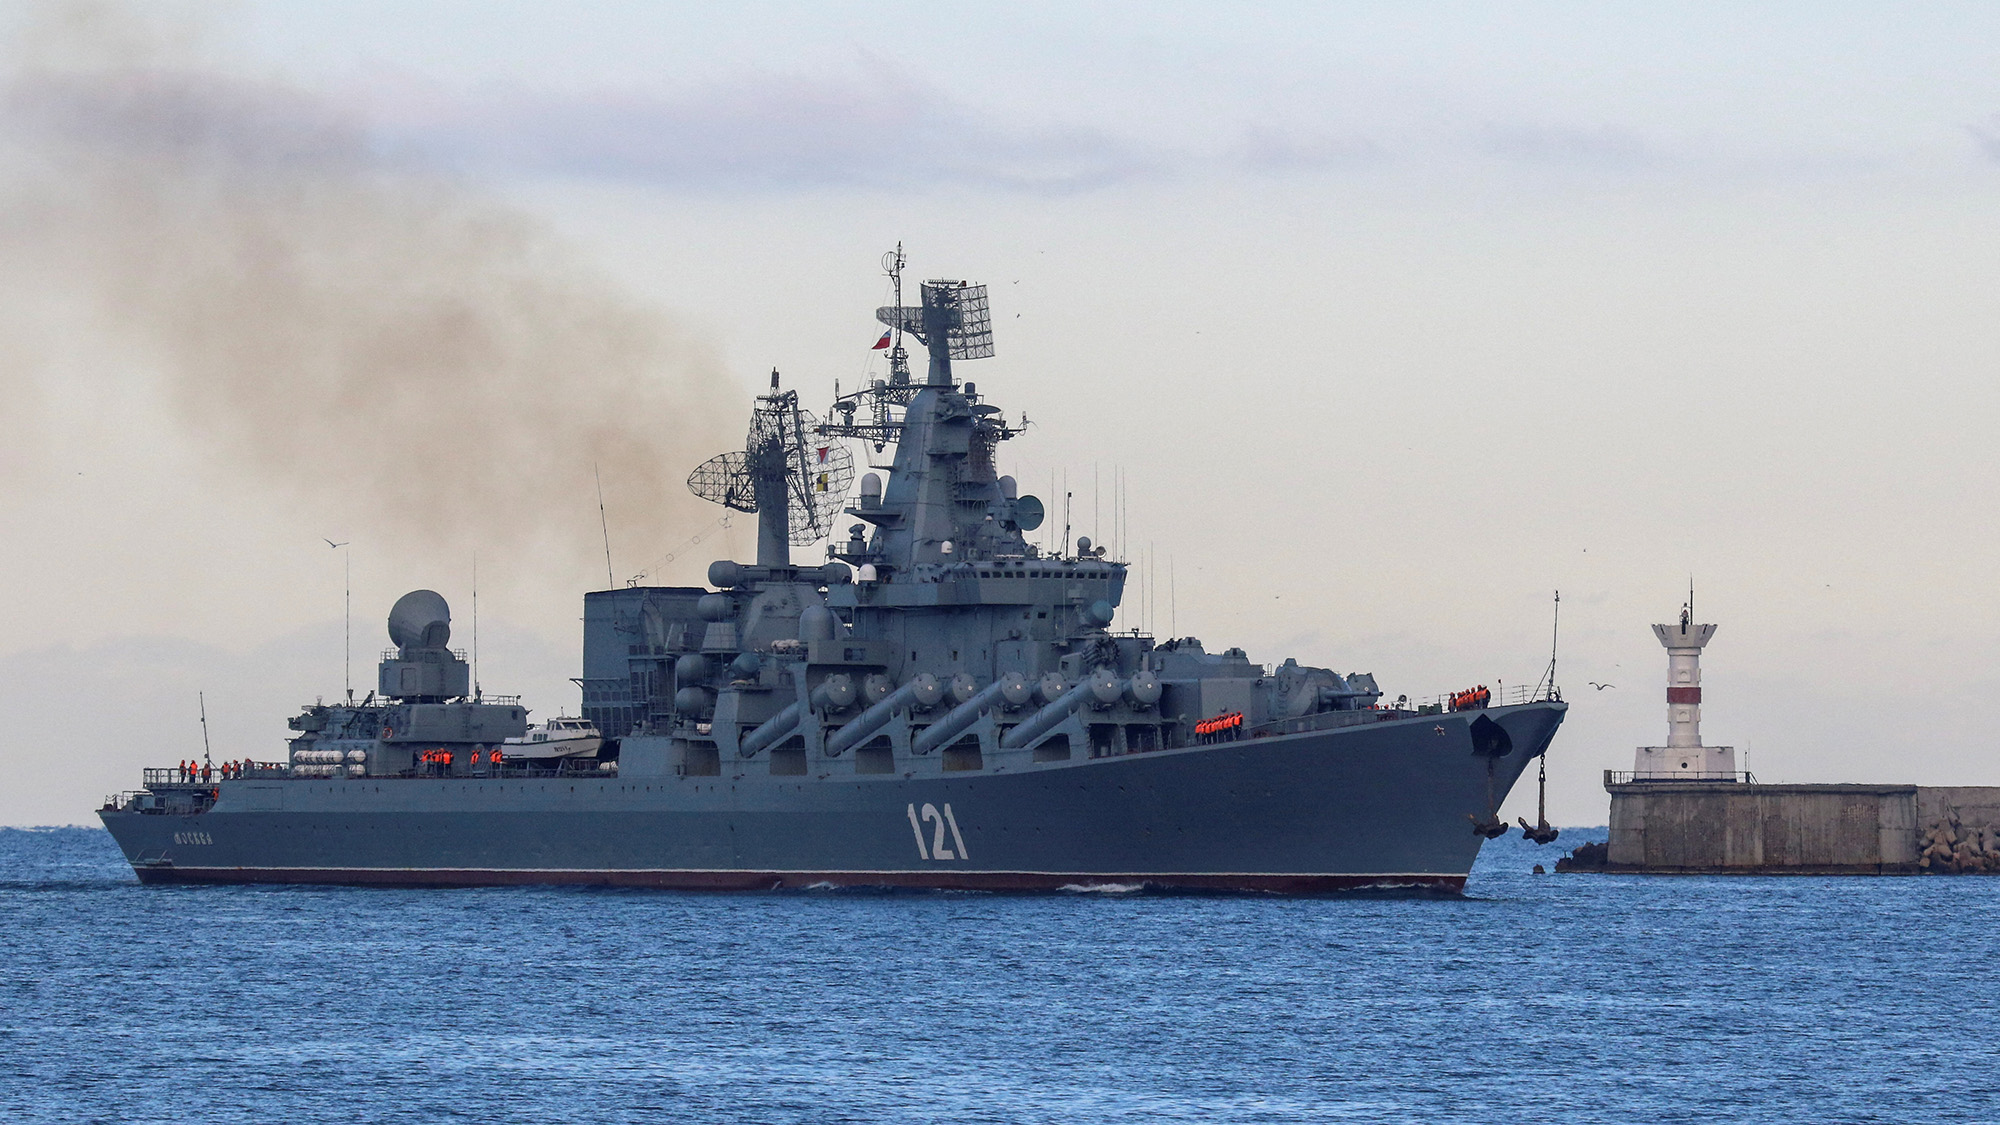 The Russian guided-missile cruiser Moskva sails back to the port of Sevastopol, Crimea on November 16, 2021.